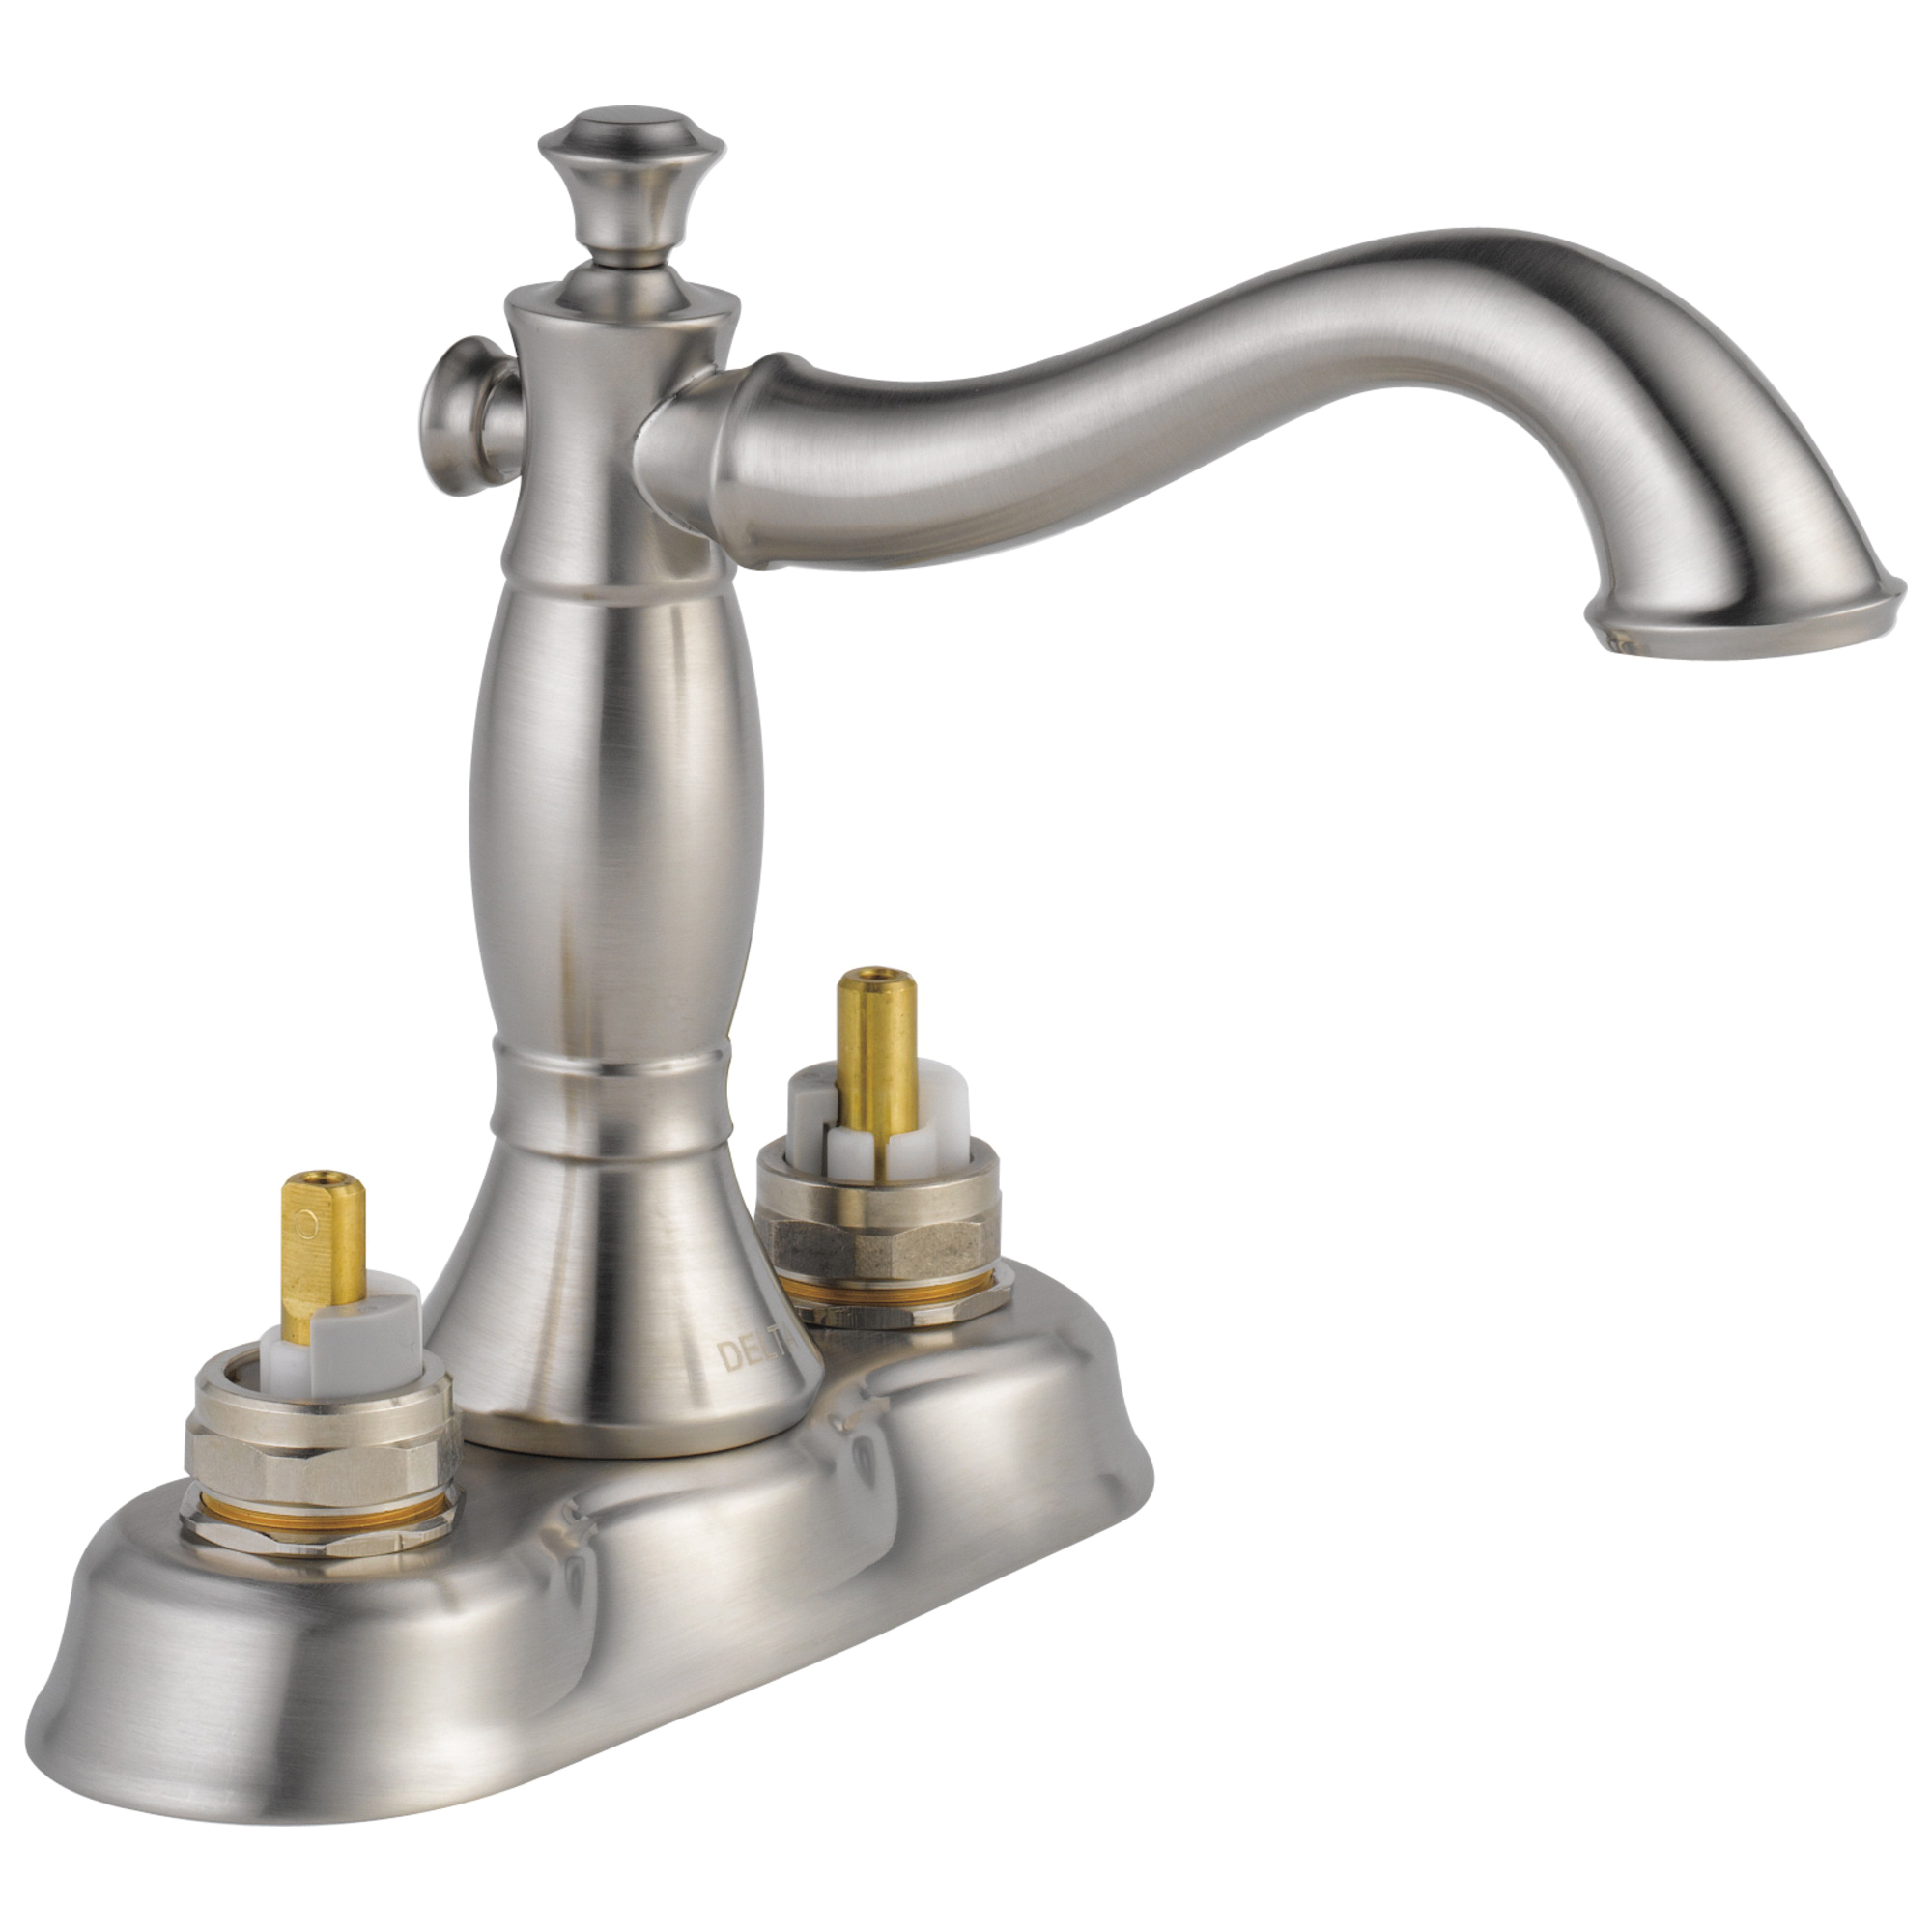 2597LF-SSMPU-LHP Centerset Lavatory Faucet, Cassidy™, Stainless Steel, Pop-Up Drain, 1.2 gpm - Discontinued